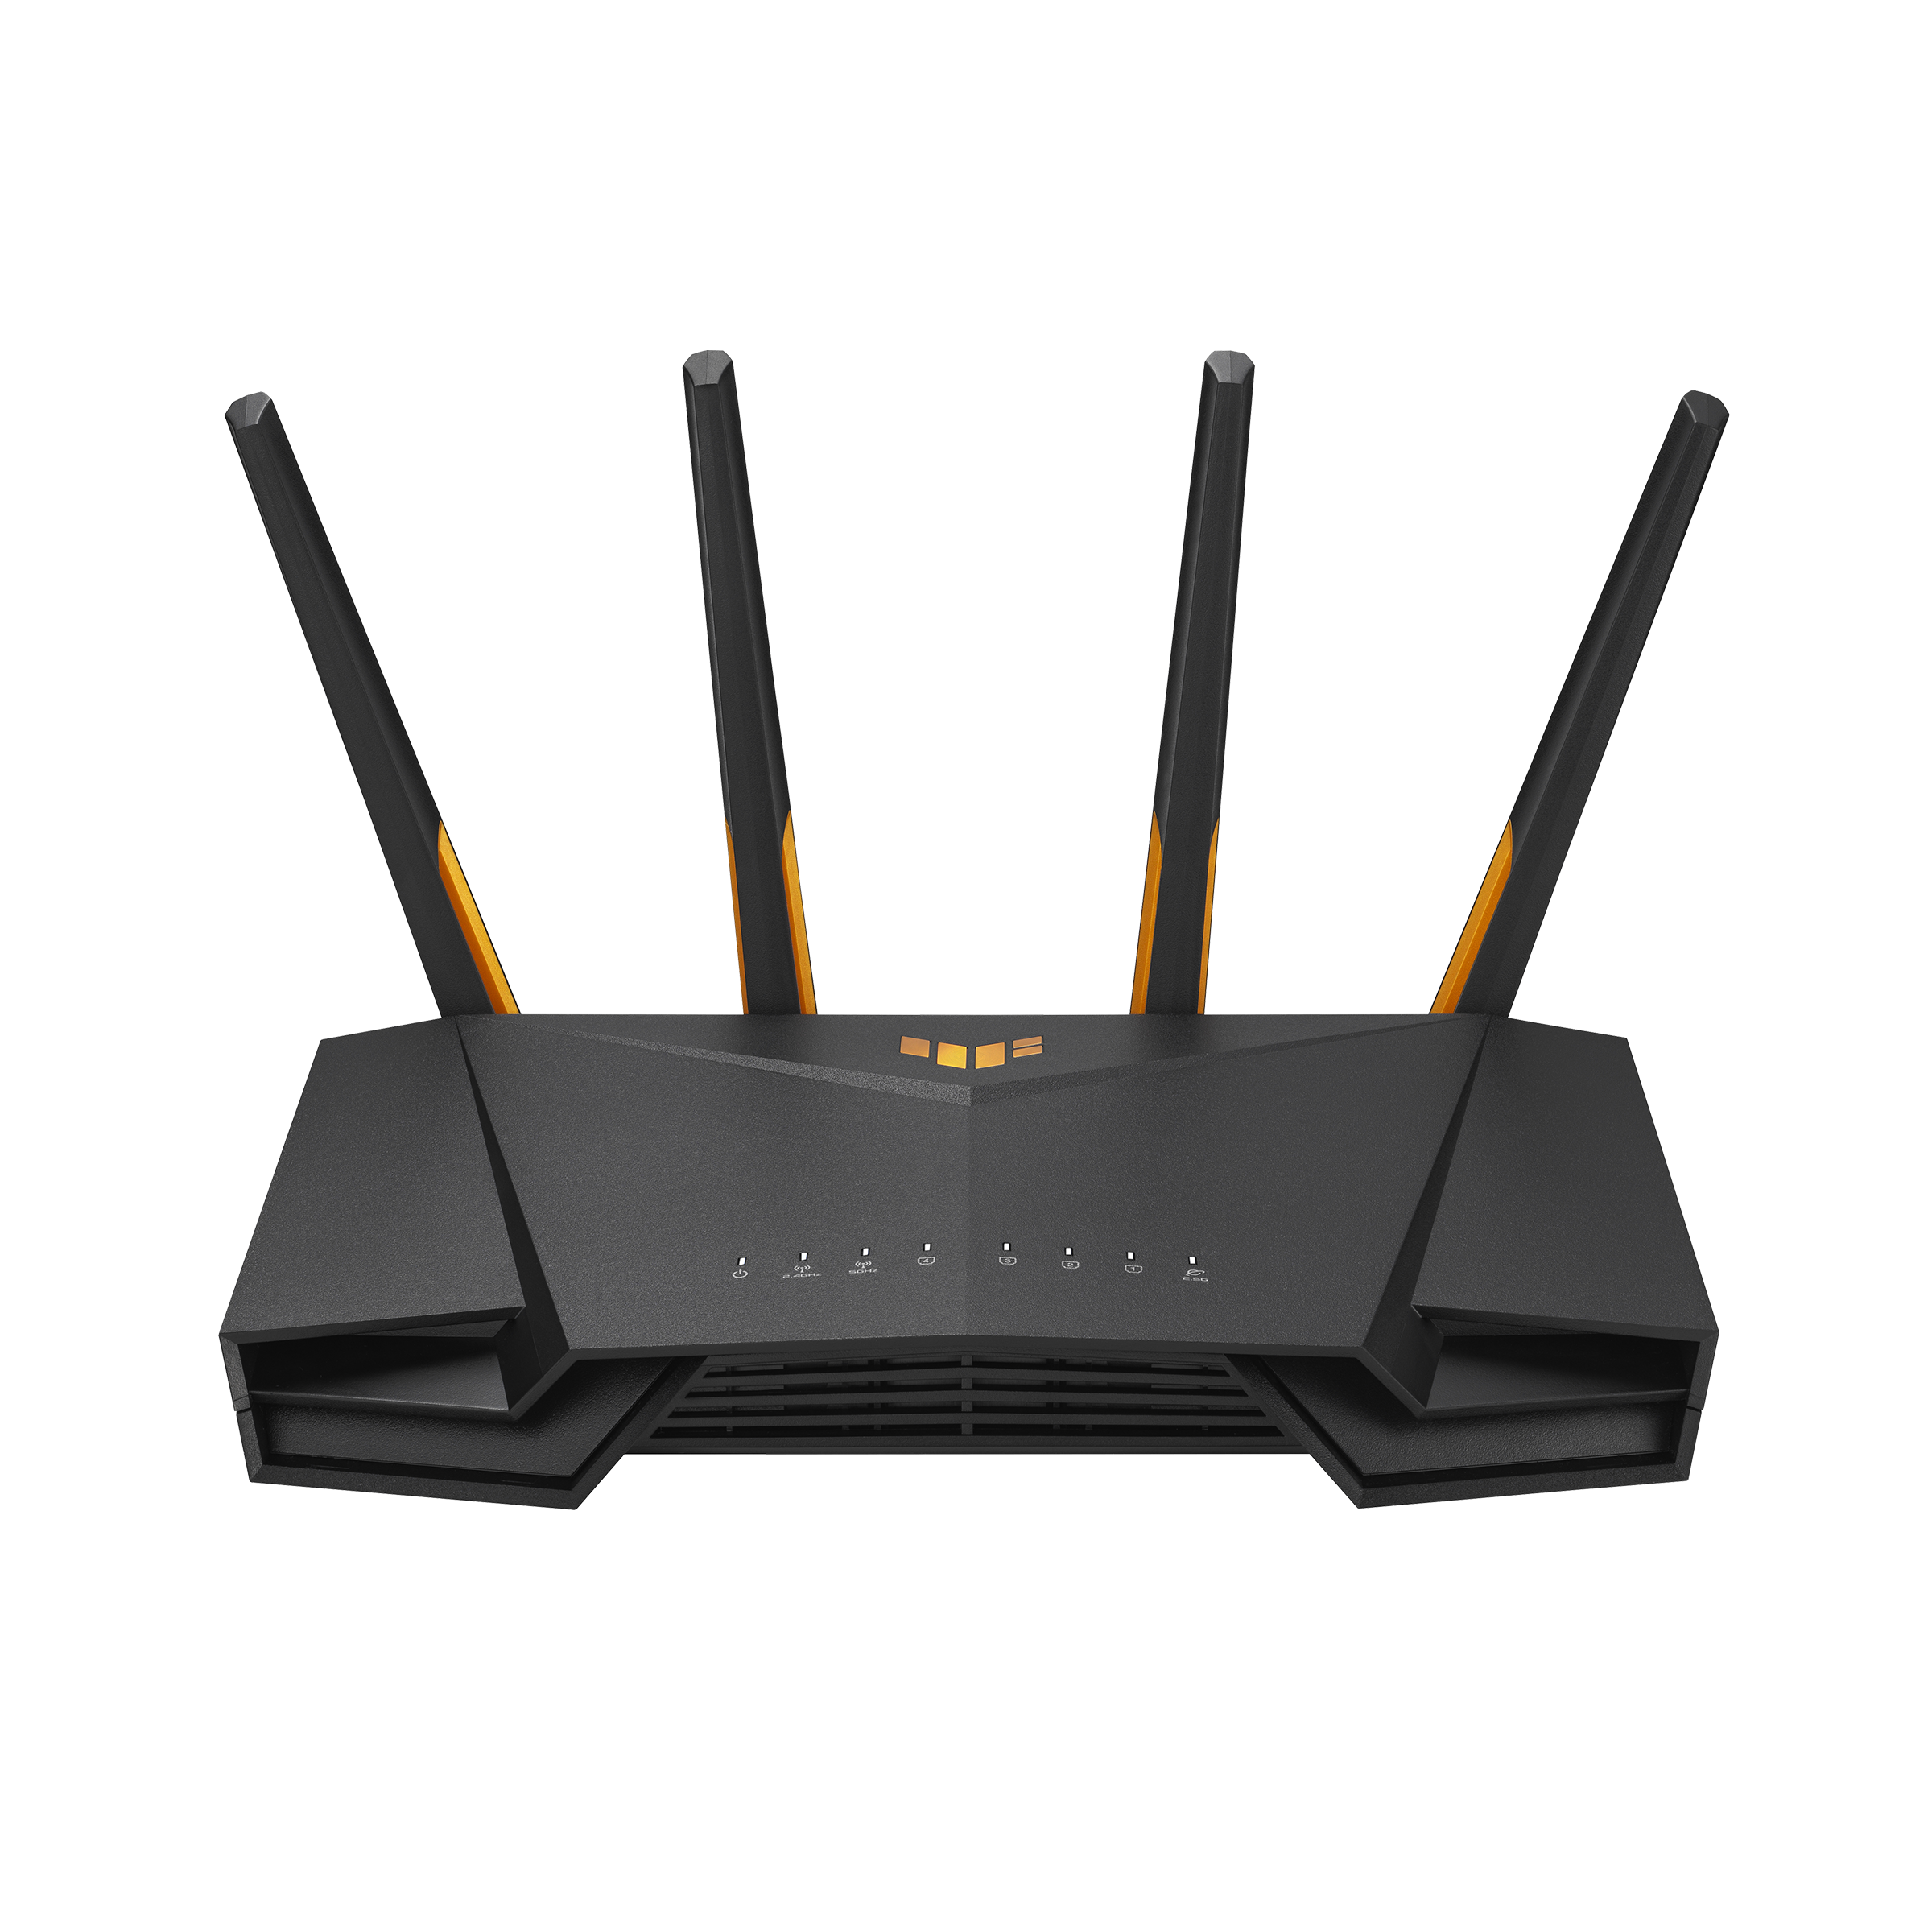 TUF Gaming AX4200 | WiFi Routers | ASUS India